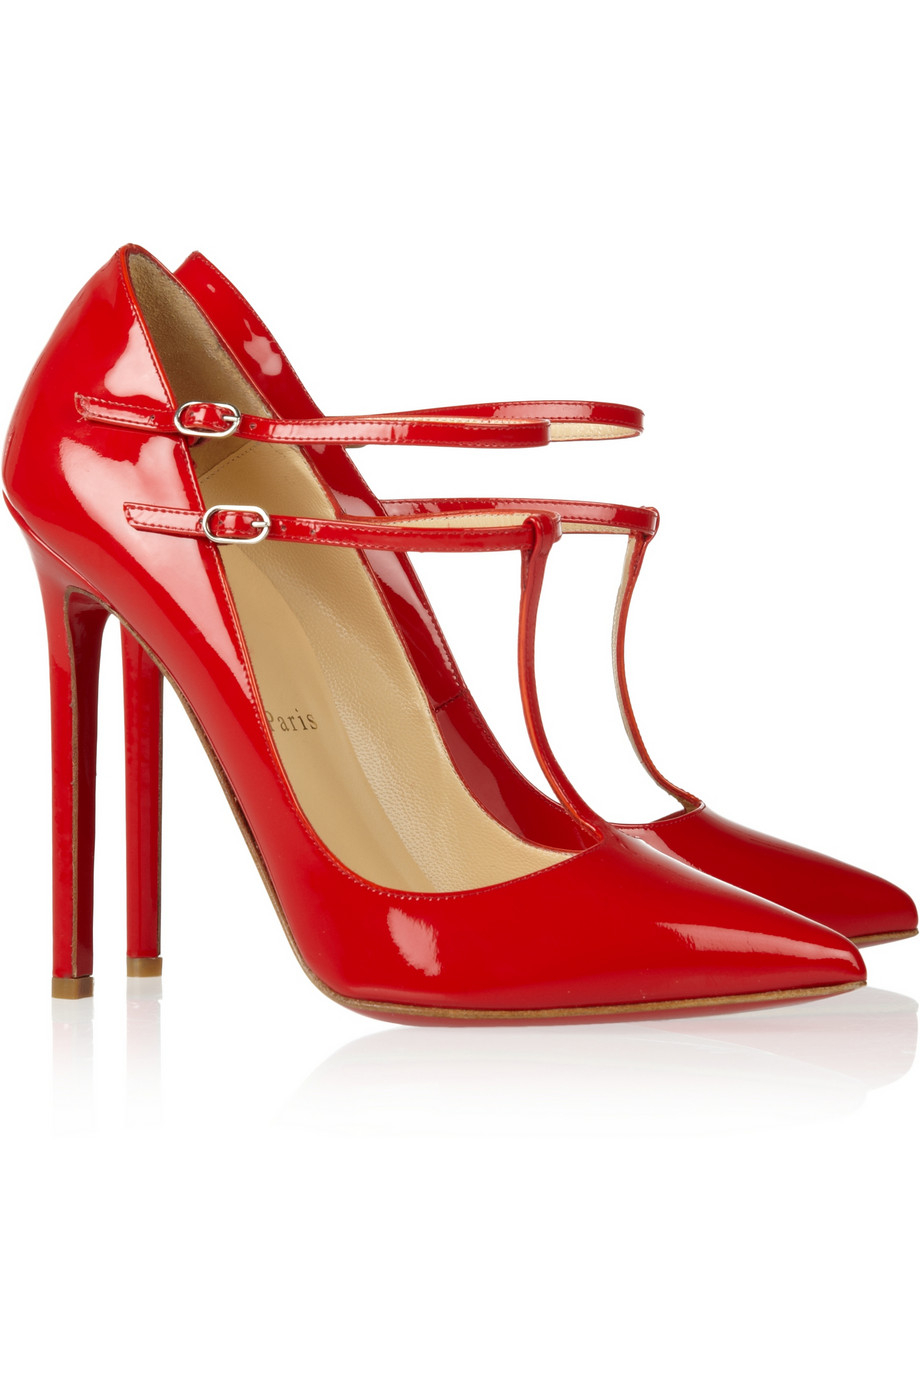 Christian Louboutin V Neck 120 Patent-Leather Pumps in Red - Lyst